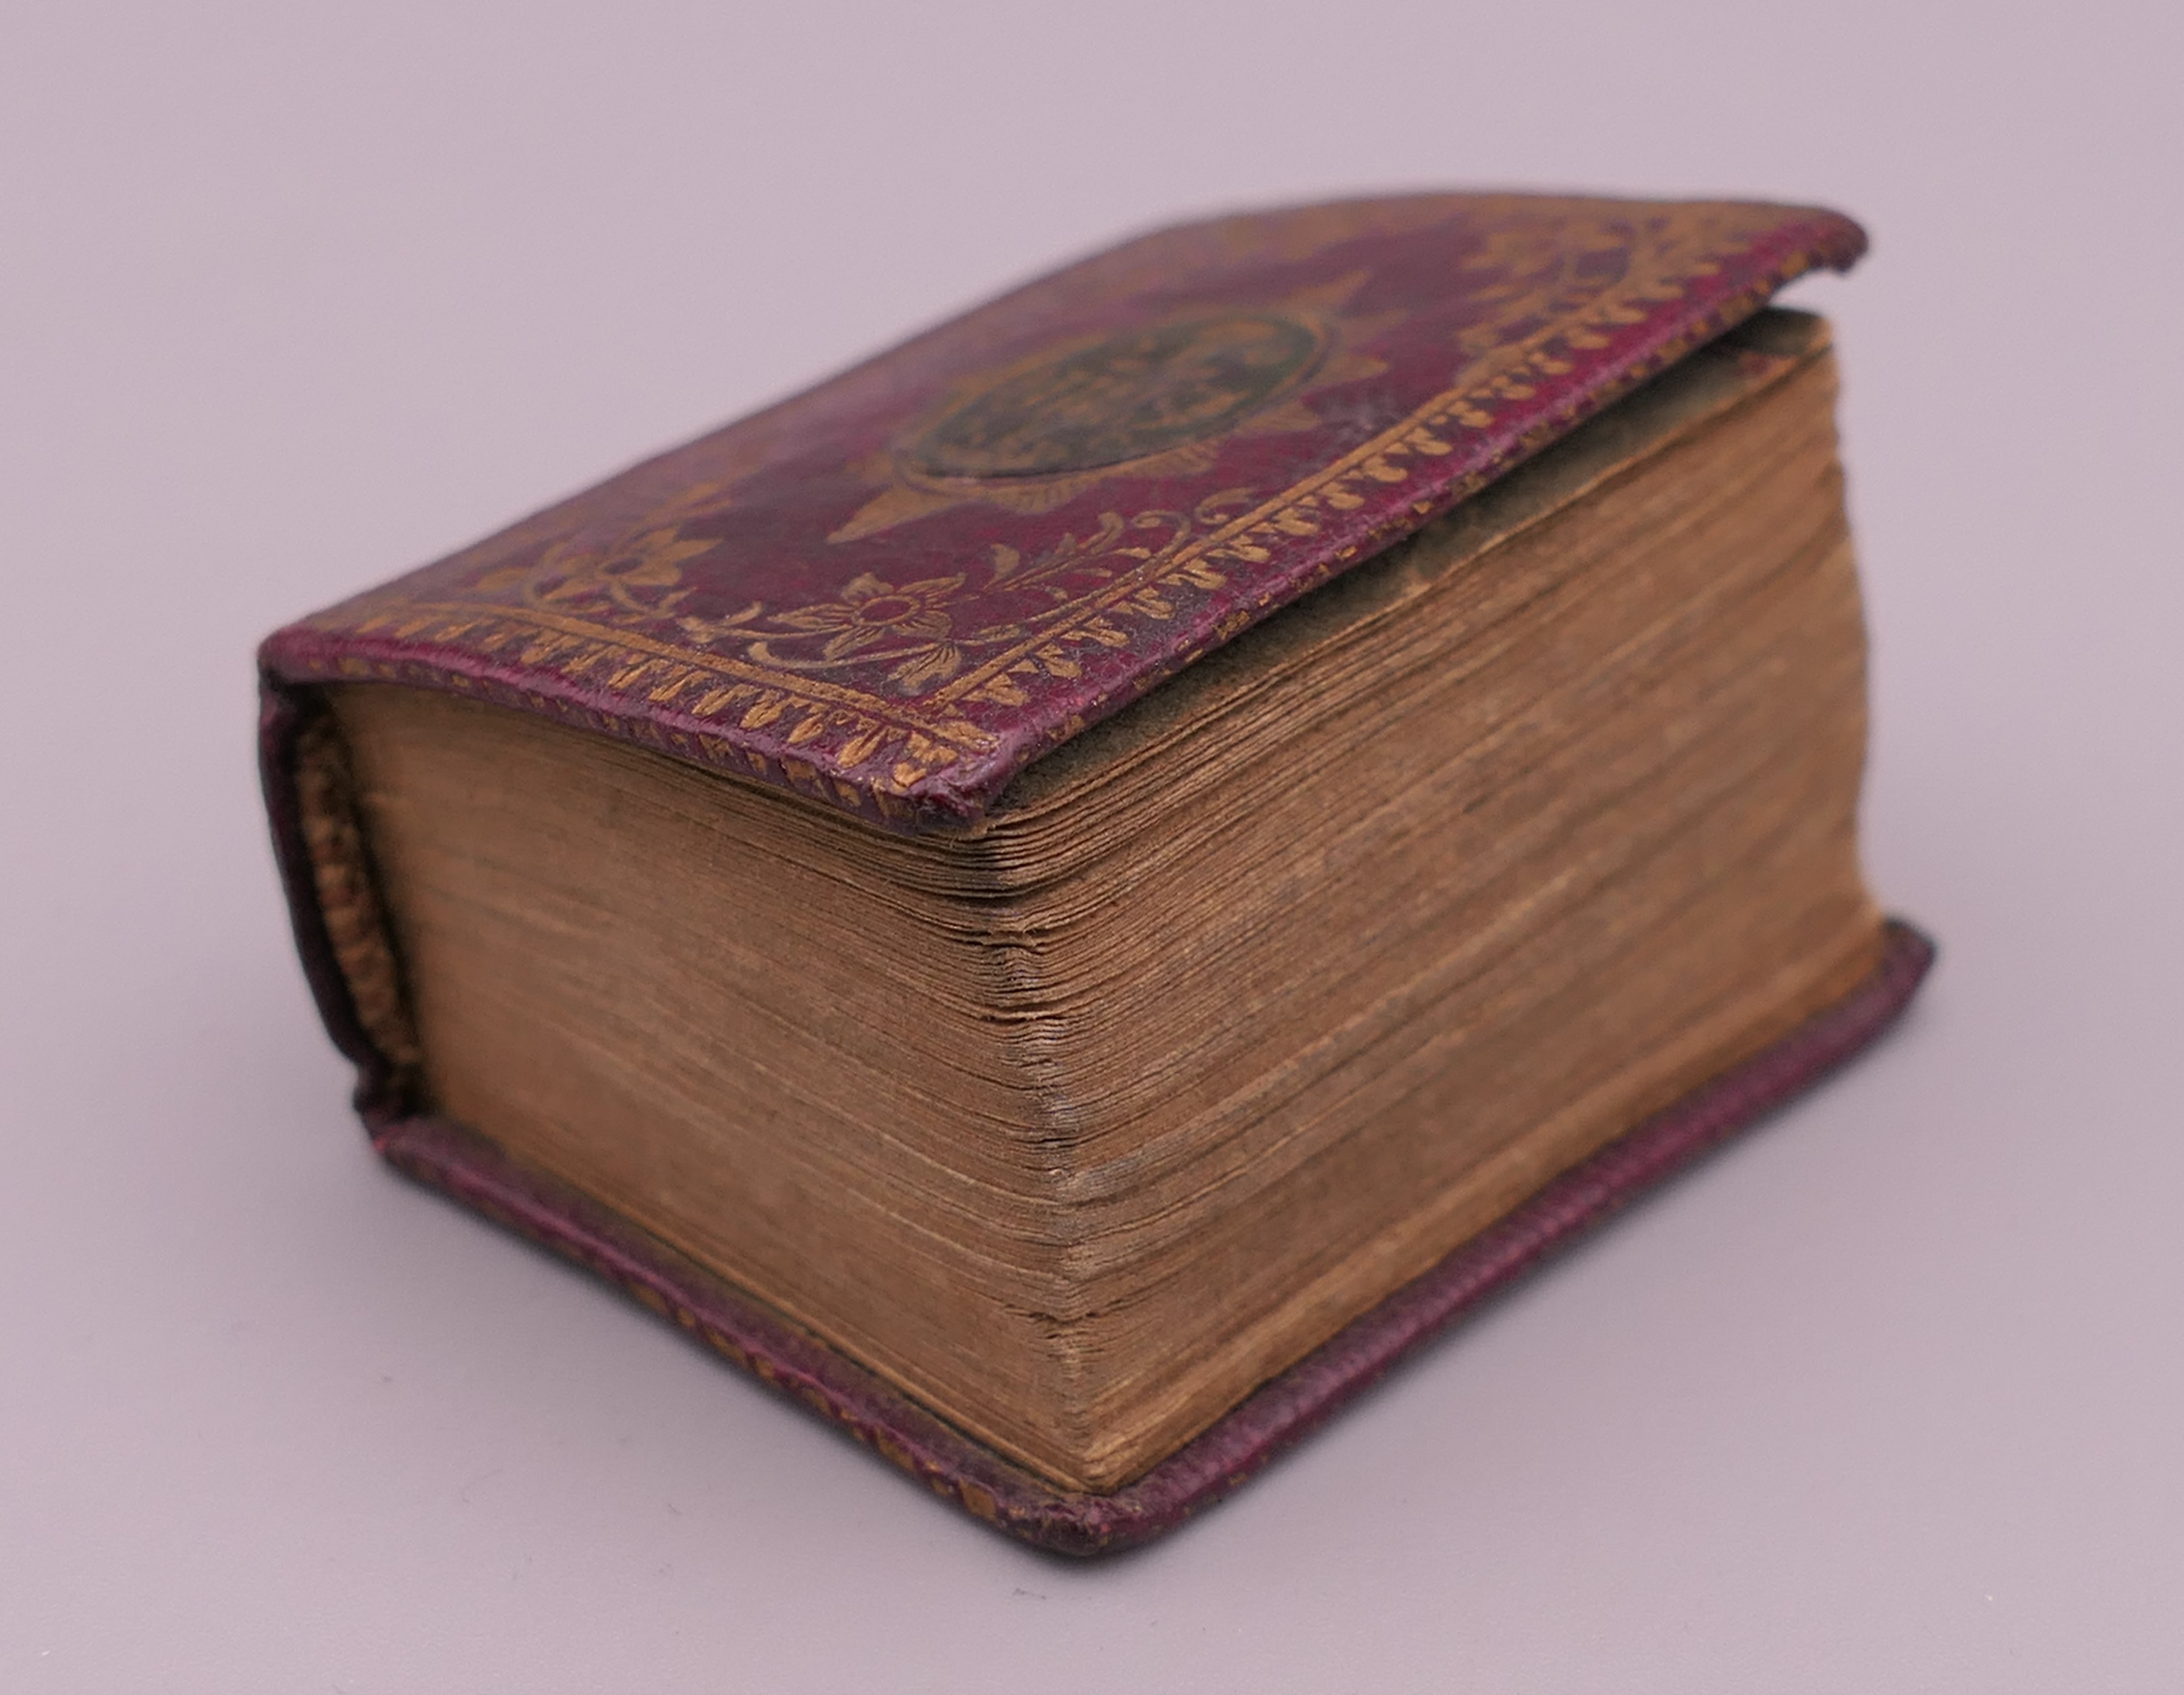 A 1786 miniature Bible. 3 cm wide. - Image 2 of 6